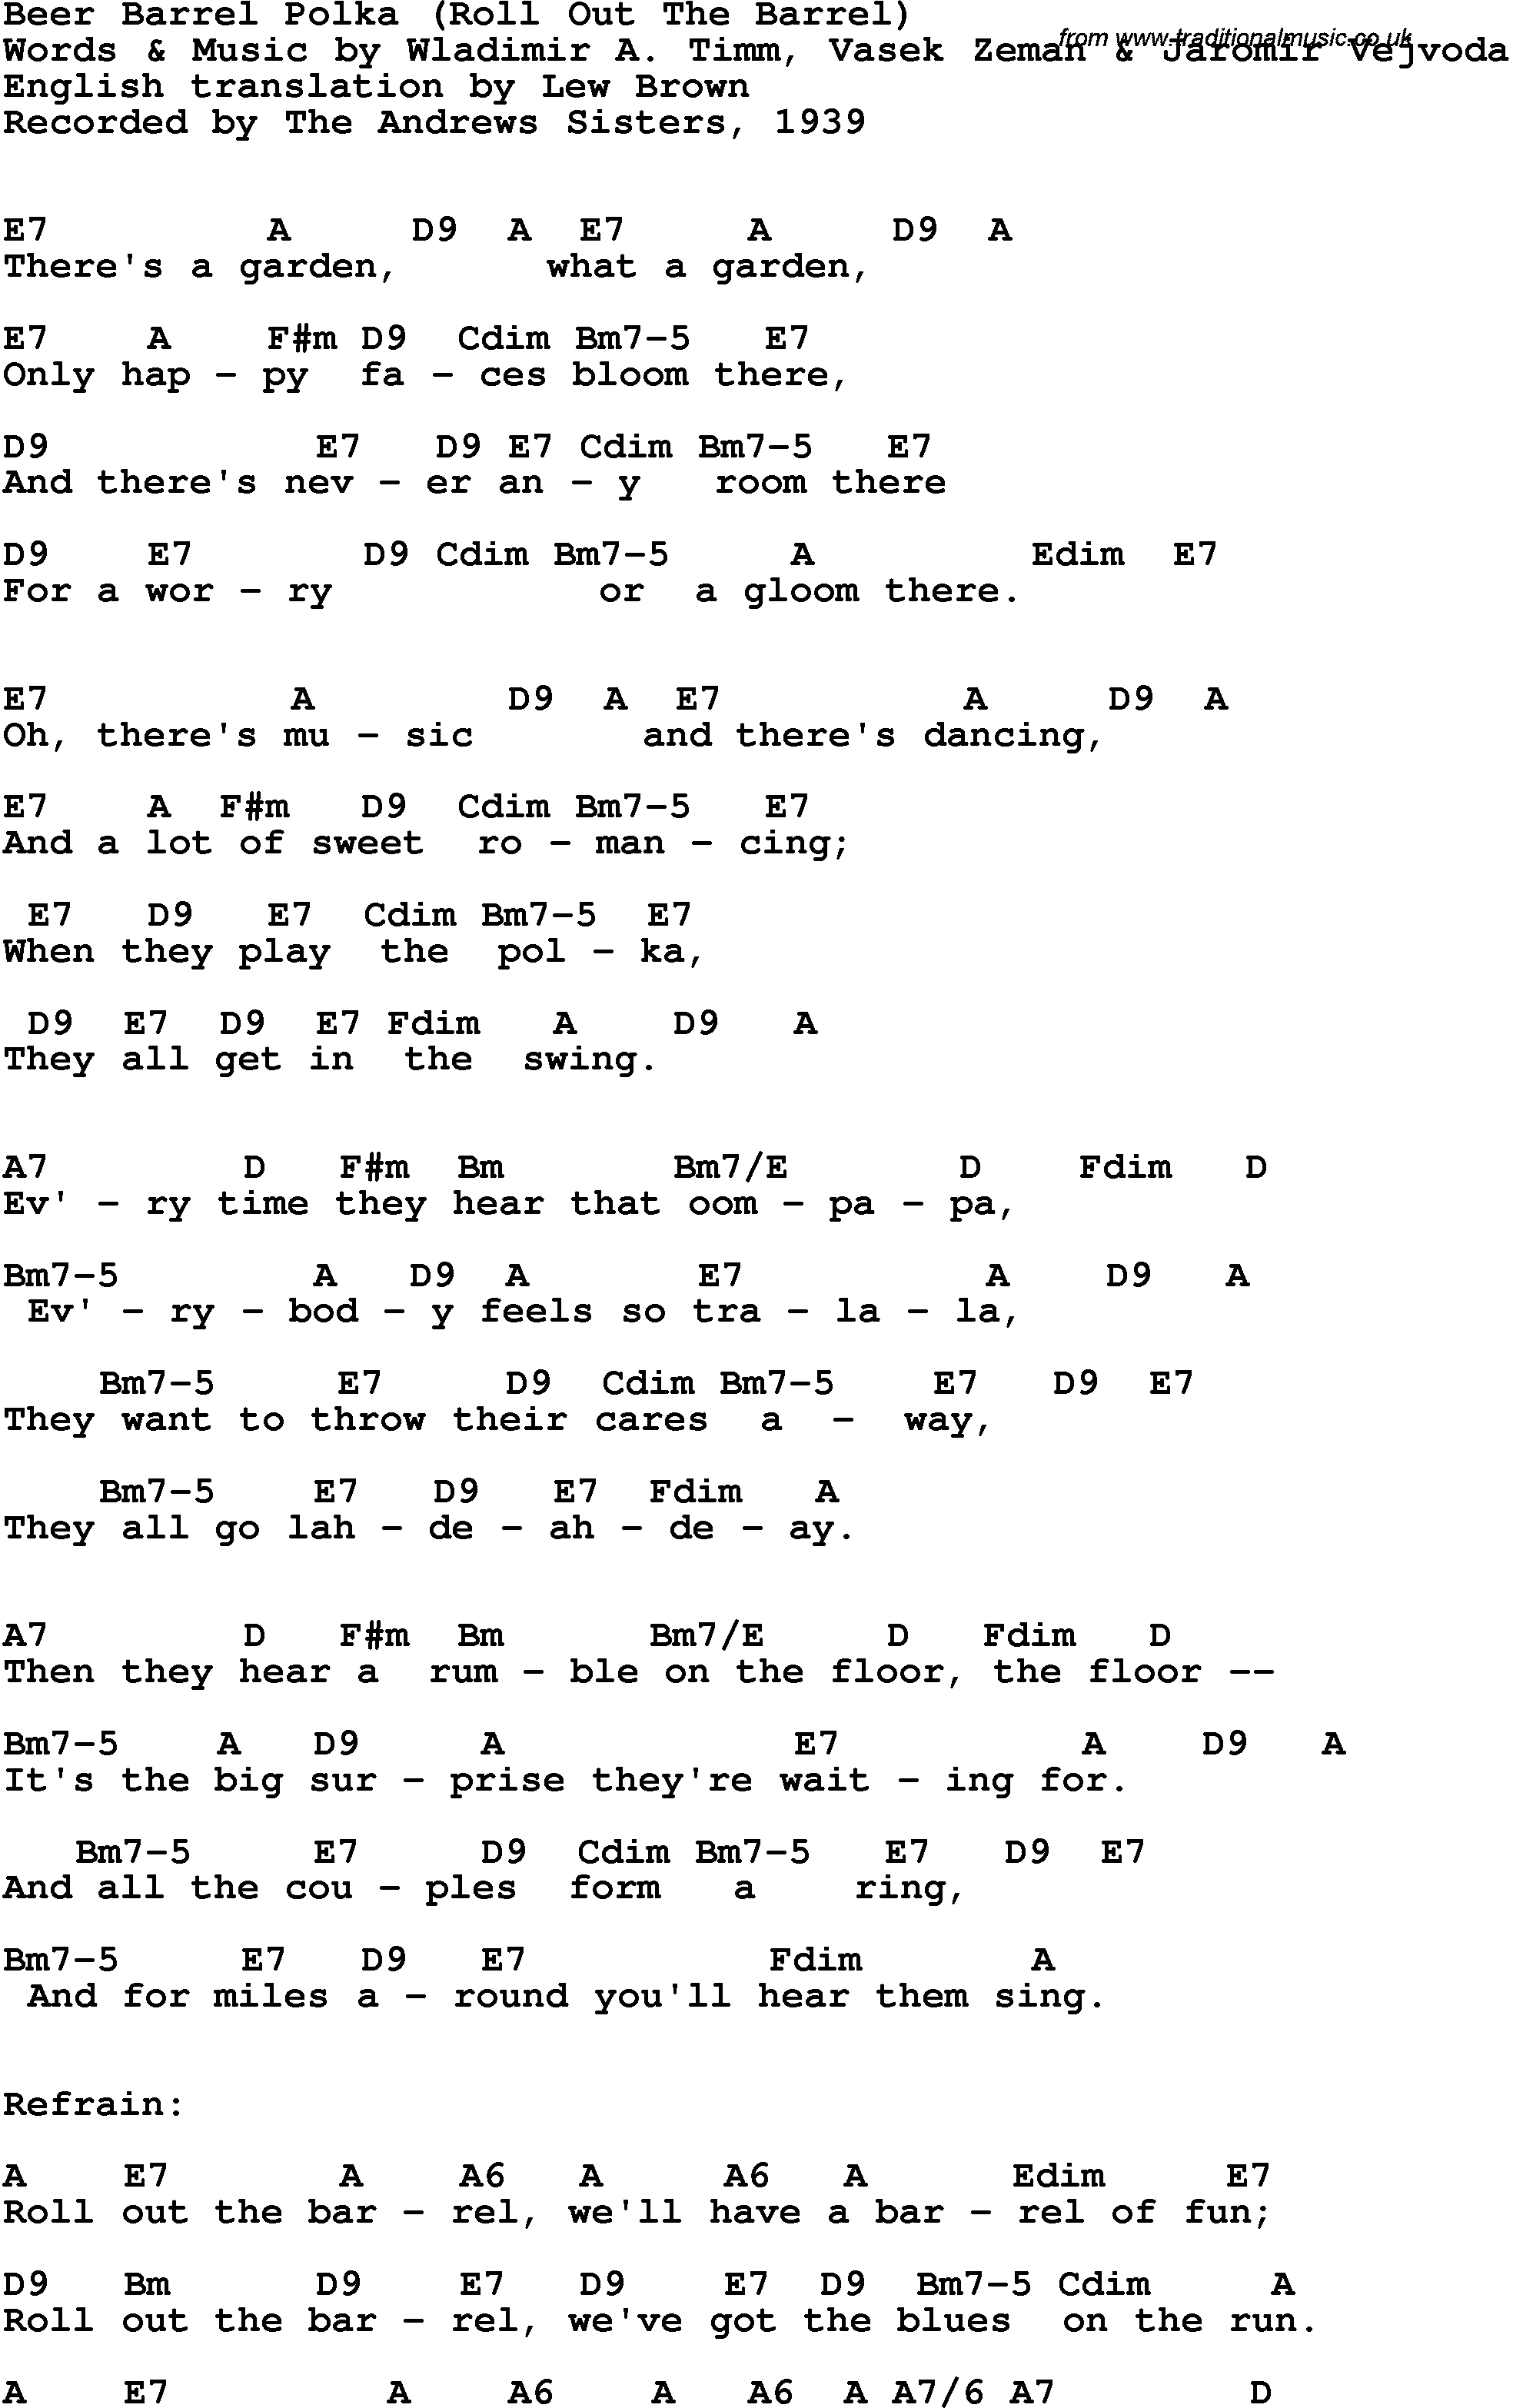 Song Lyrics with guitar chords for Beer Barrel Polka - The Andrews Sisters, 1949